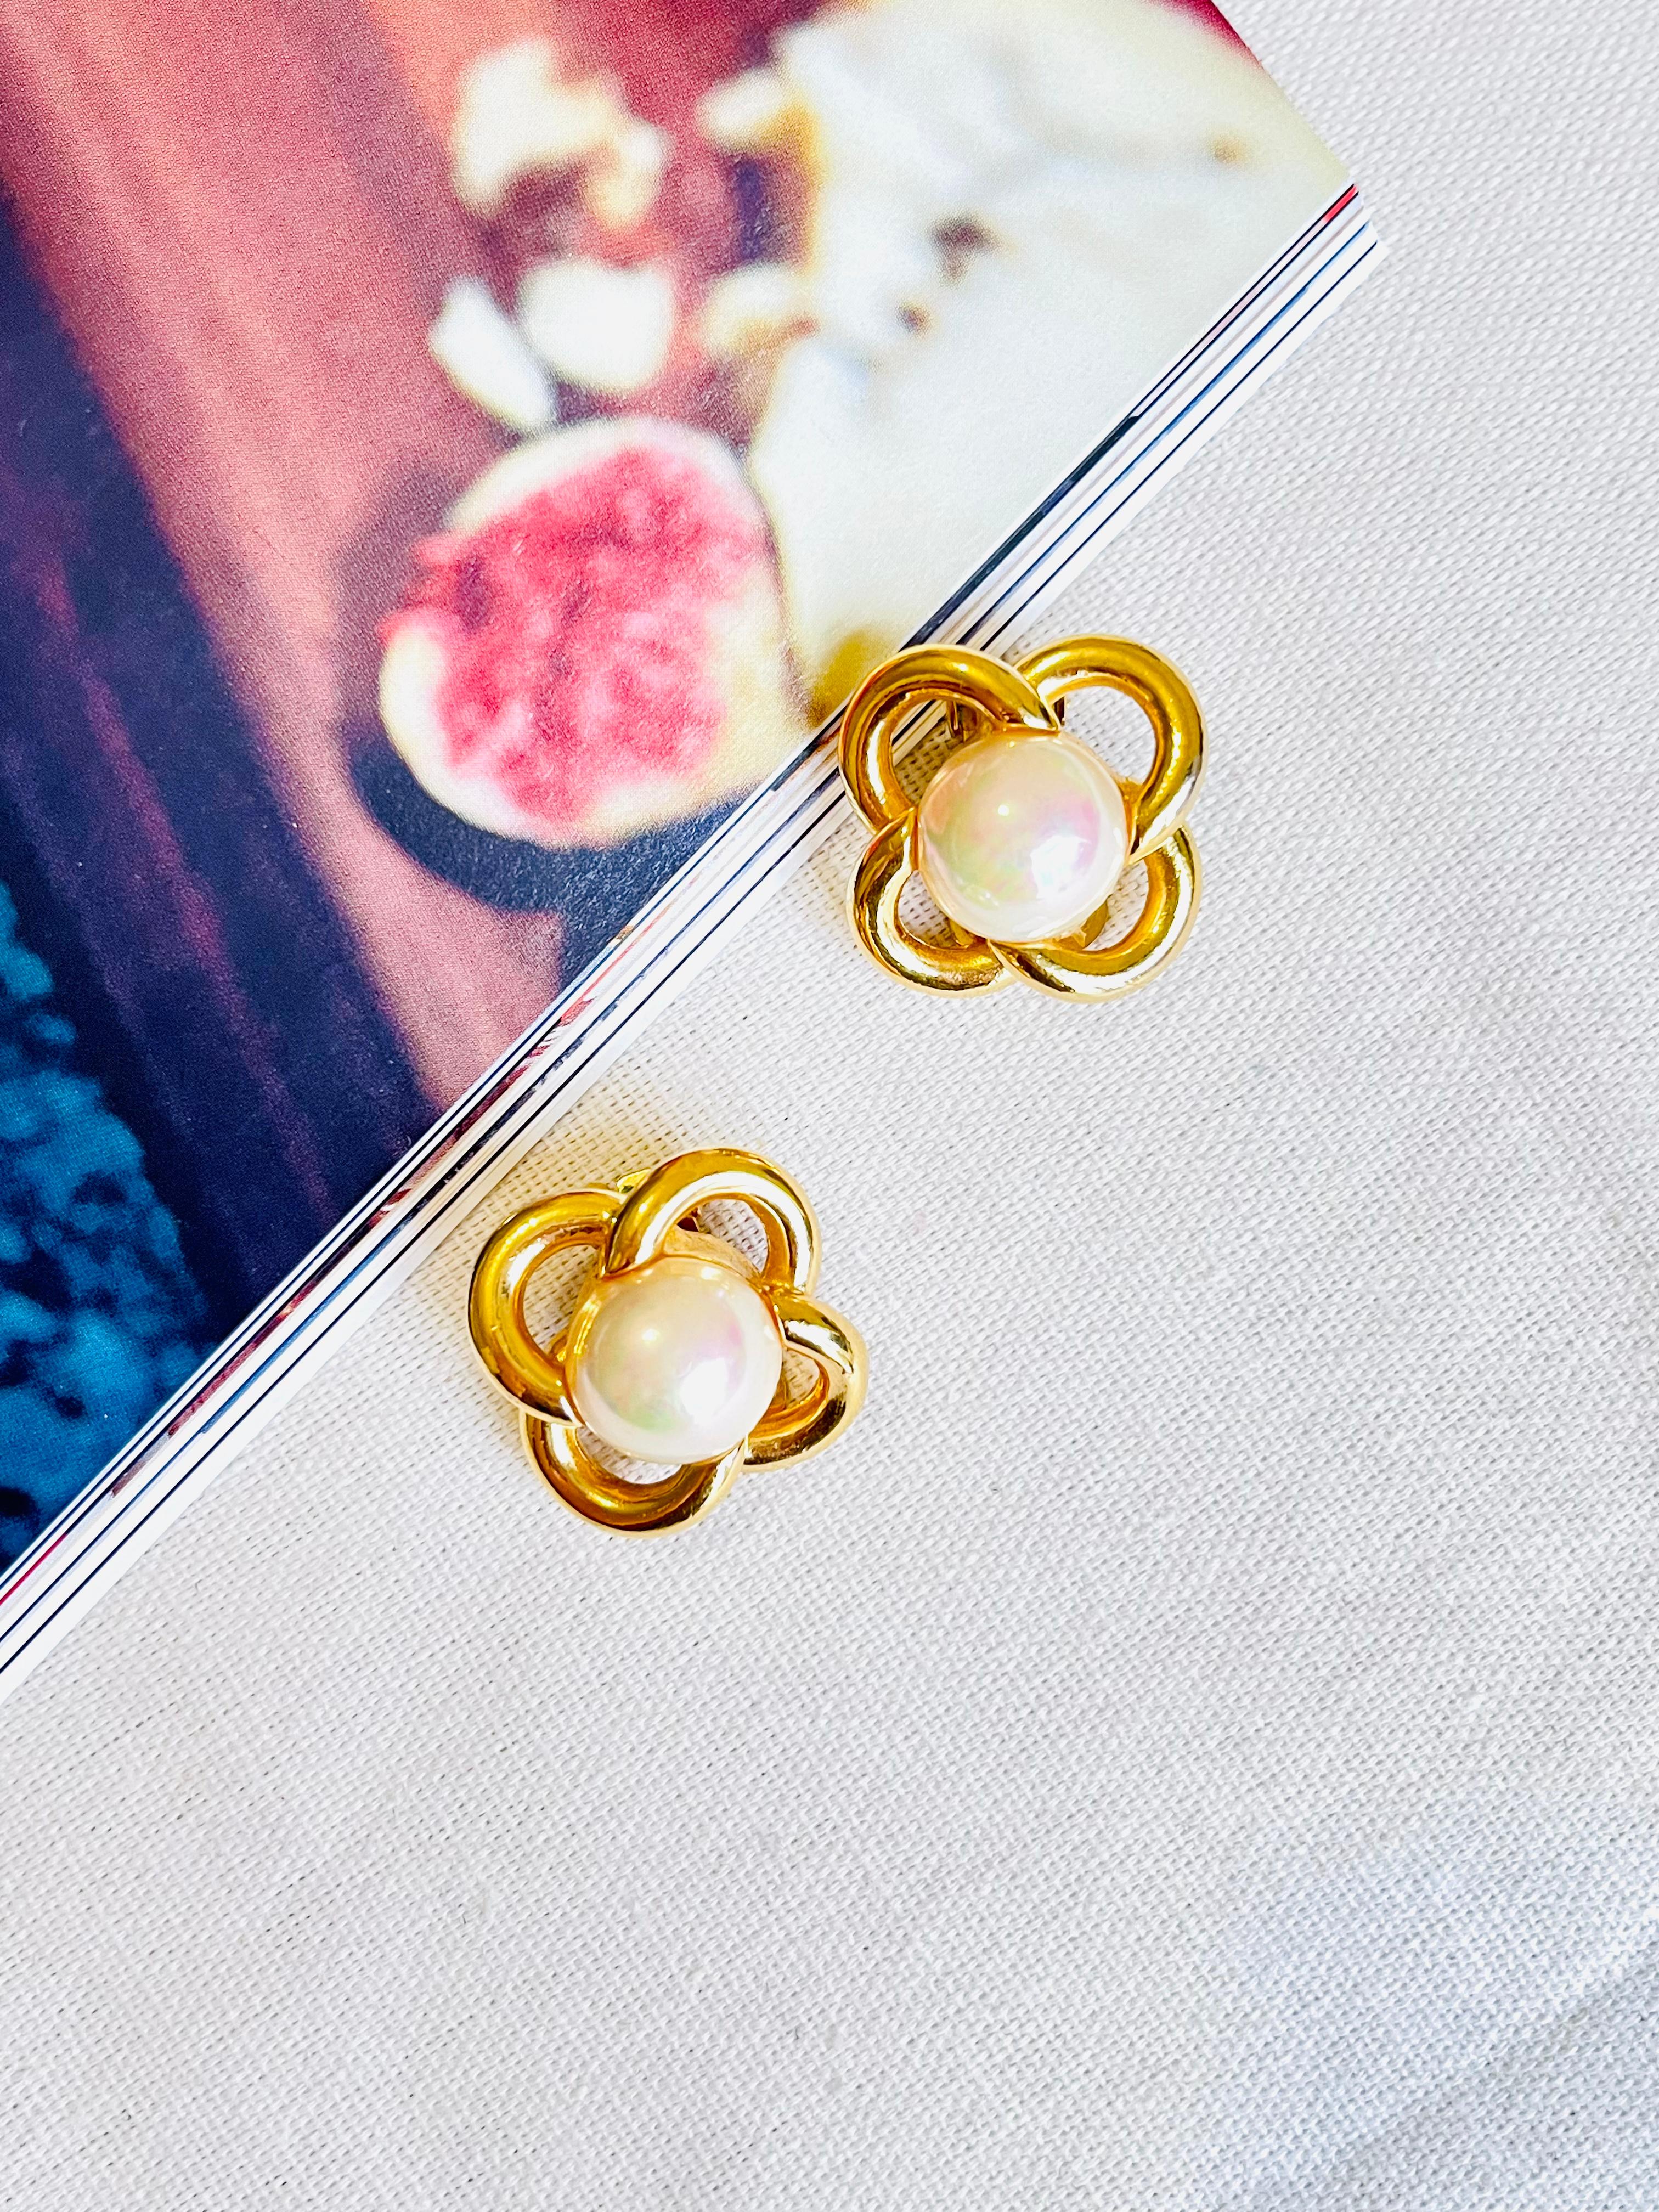 Very excellent condition. Peeled off on the faux pearl corner (very unnoticeable).

100% Genuine. Vintage and rare to find.

A very beautiful pair of earrings by Chr. DIOR, signed at the back.

Size: 2.8*2.8 cm.

Weight: 10.0 g/each.

_ _ _

Great